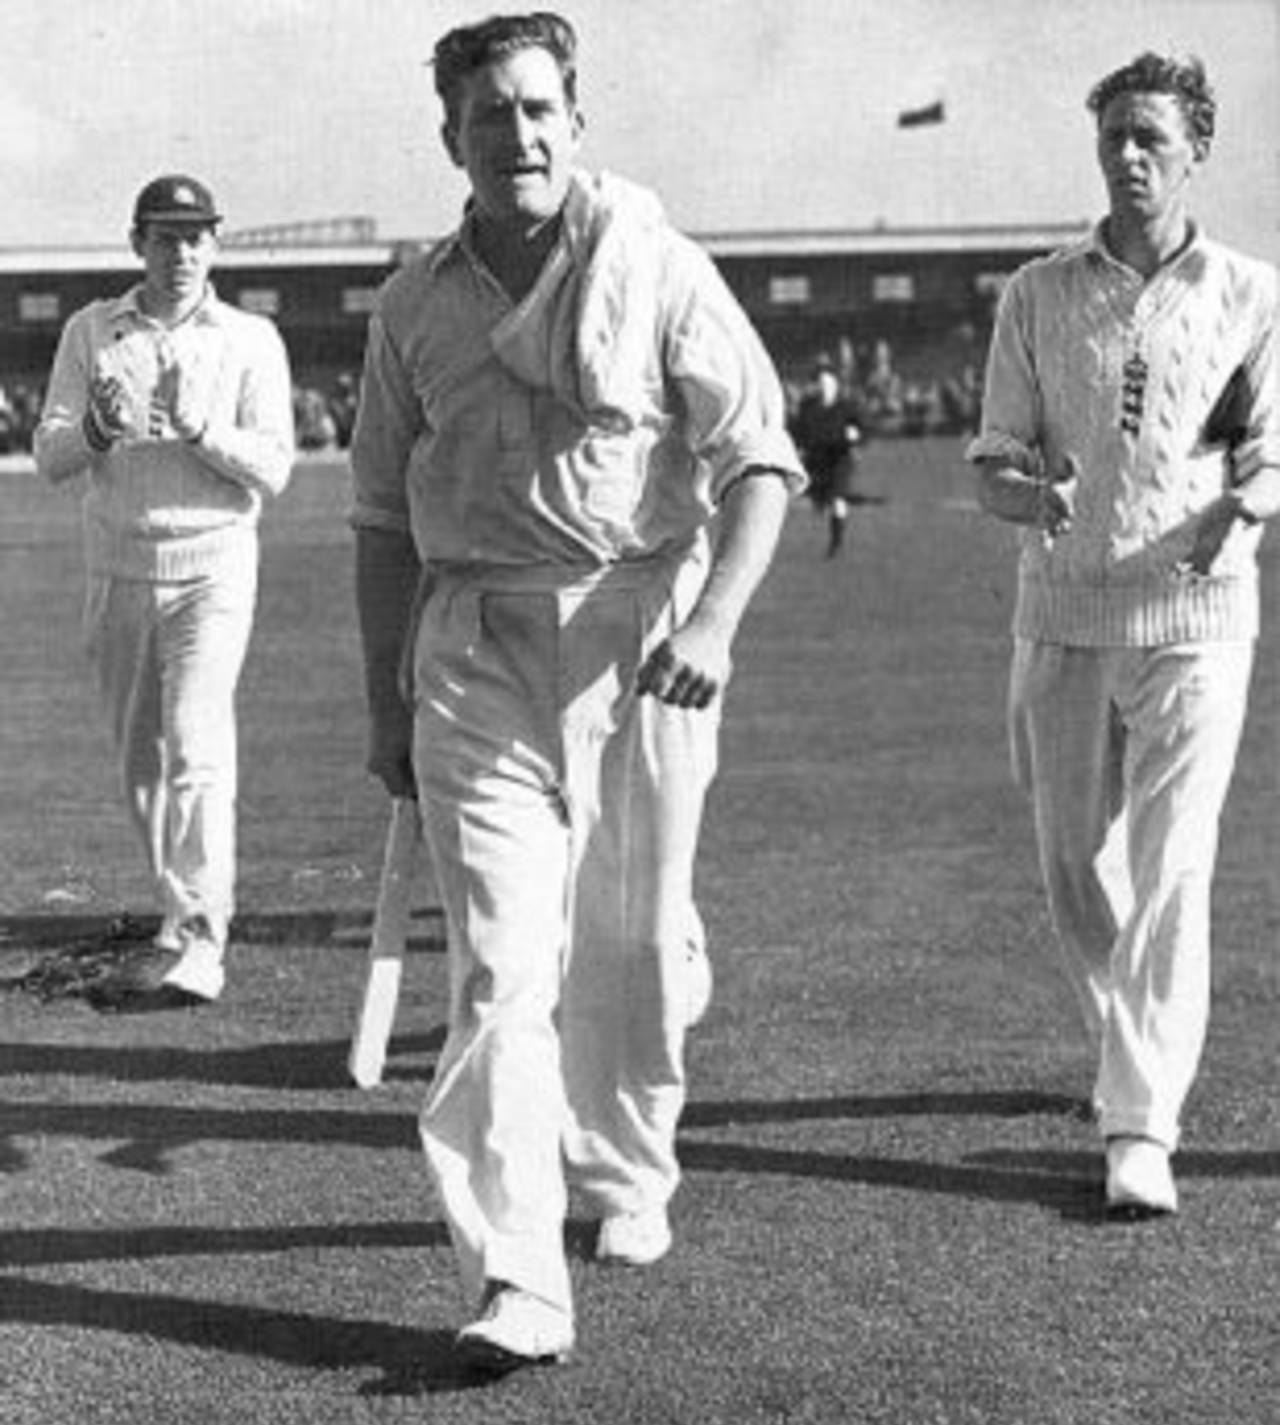 A job well done - Jim Laker ambles off after his 19-wicket haul, England v Australia, 4th Test, Old Trafford, 5th day, July 31, 1956